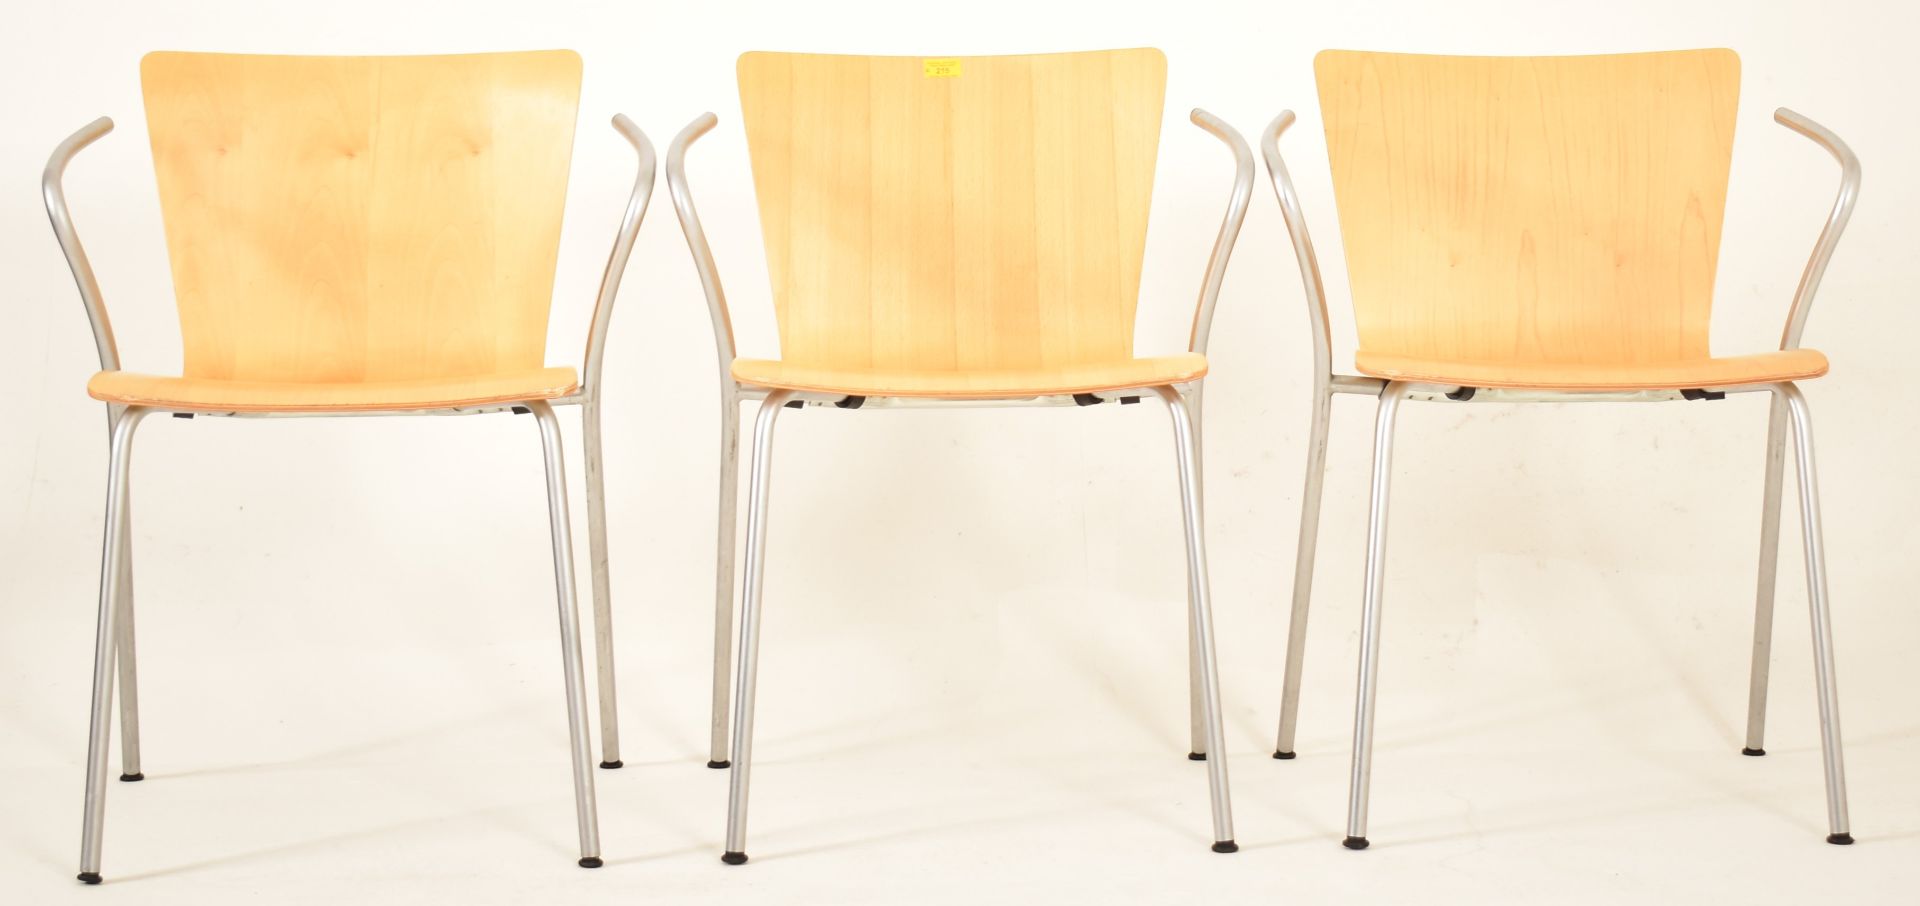 VICO MAGISTRETTI FOR FRITZ HANSEN - VICO DUO - SIX DINING CHAIRS - Image 2 of 6